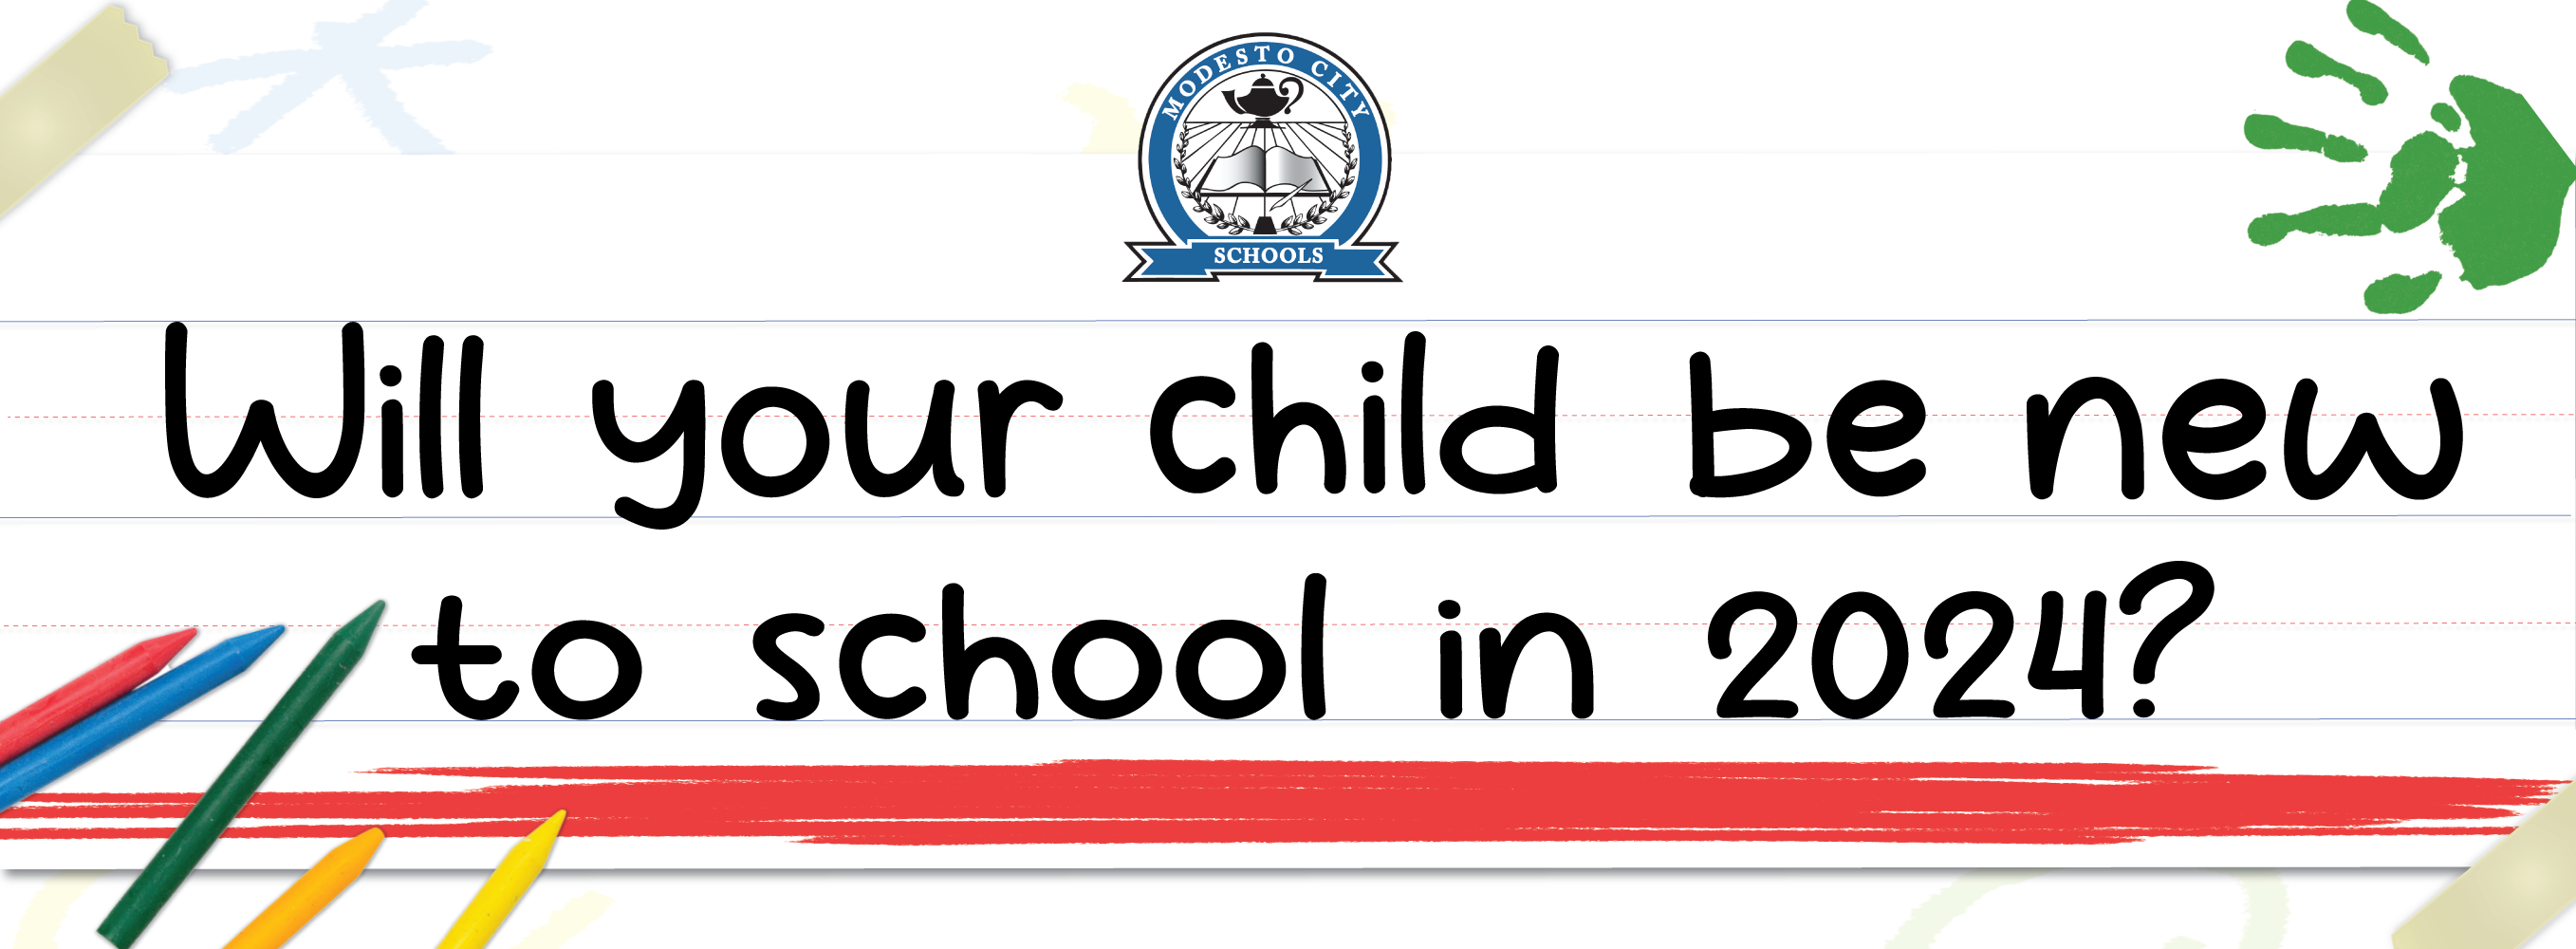 Will your child be new to school in 2024?